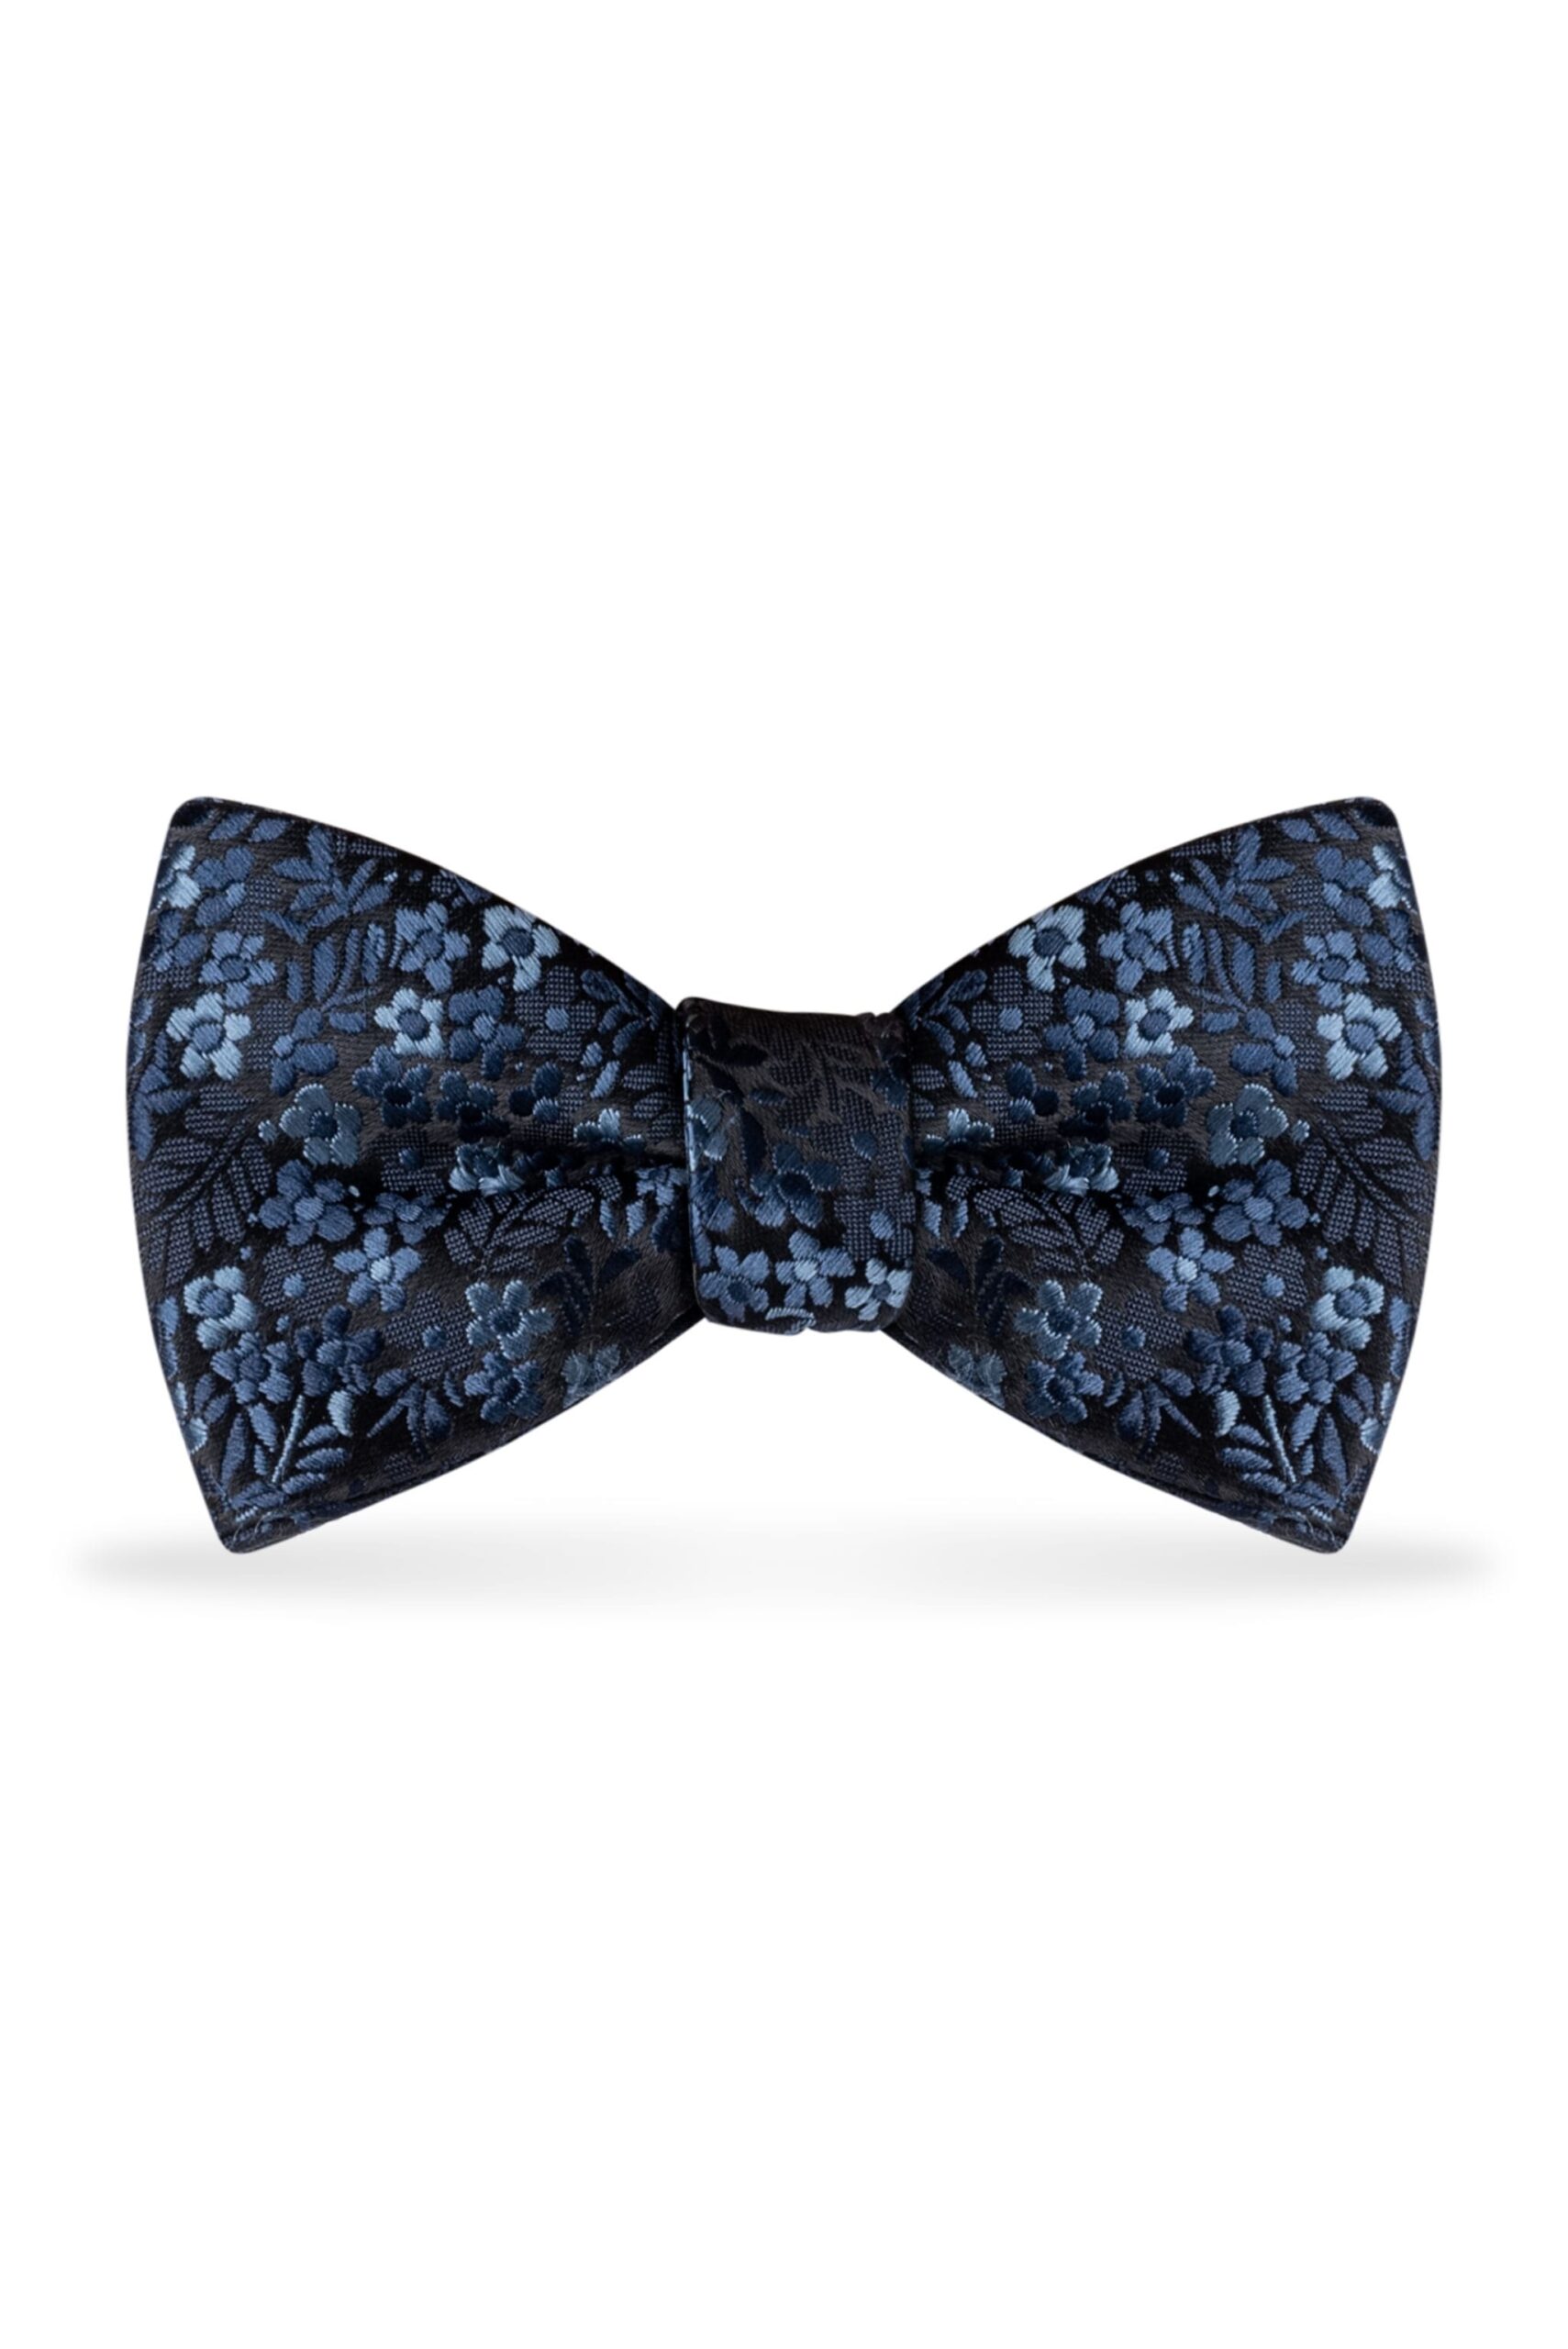 Floral Navy Bow Tie 1